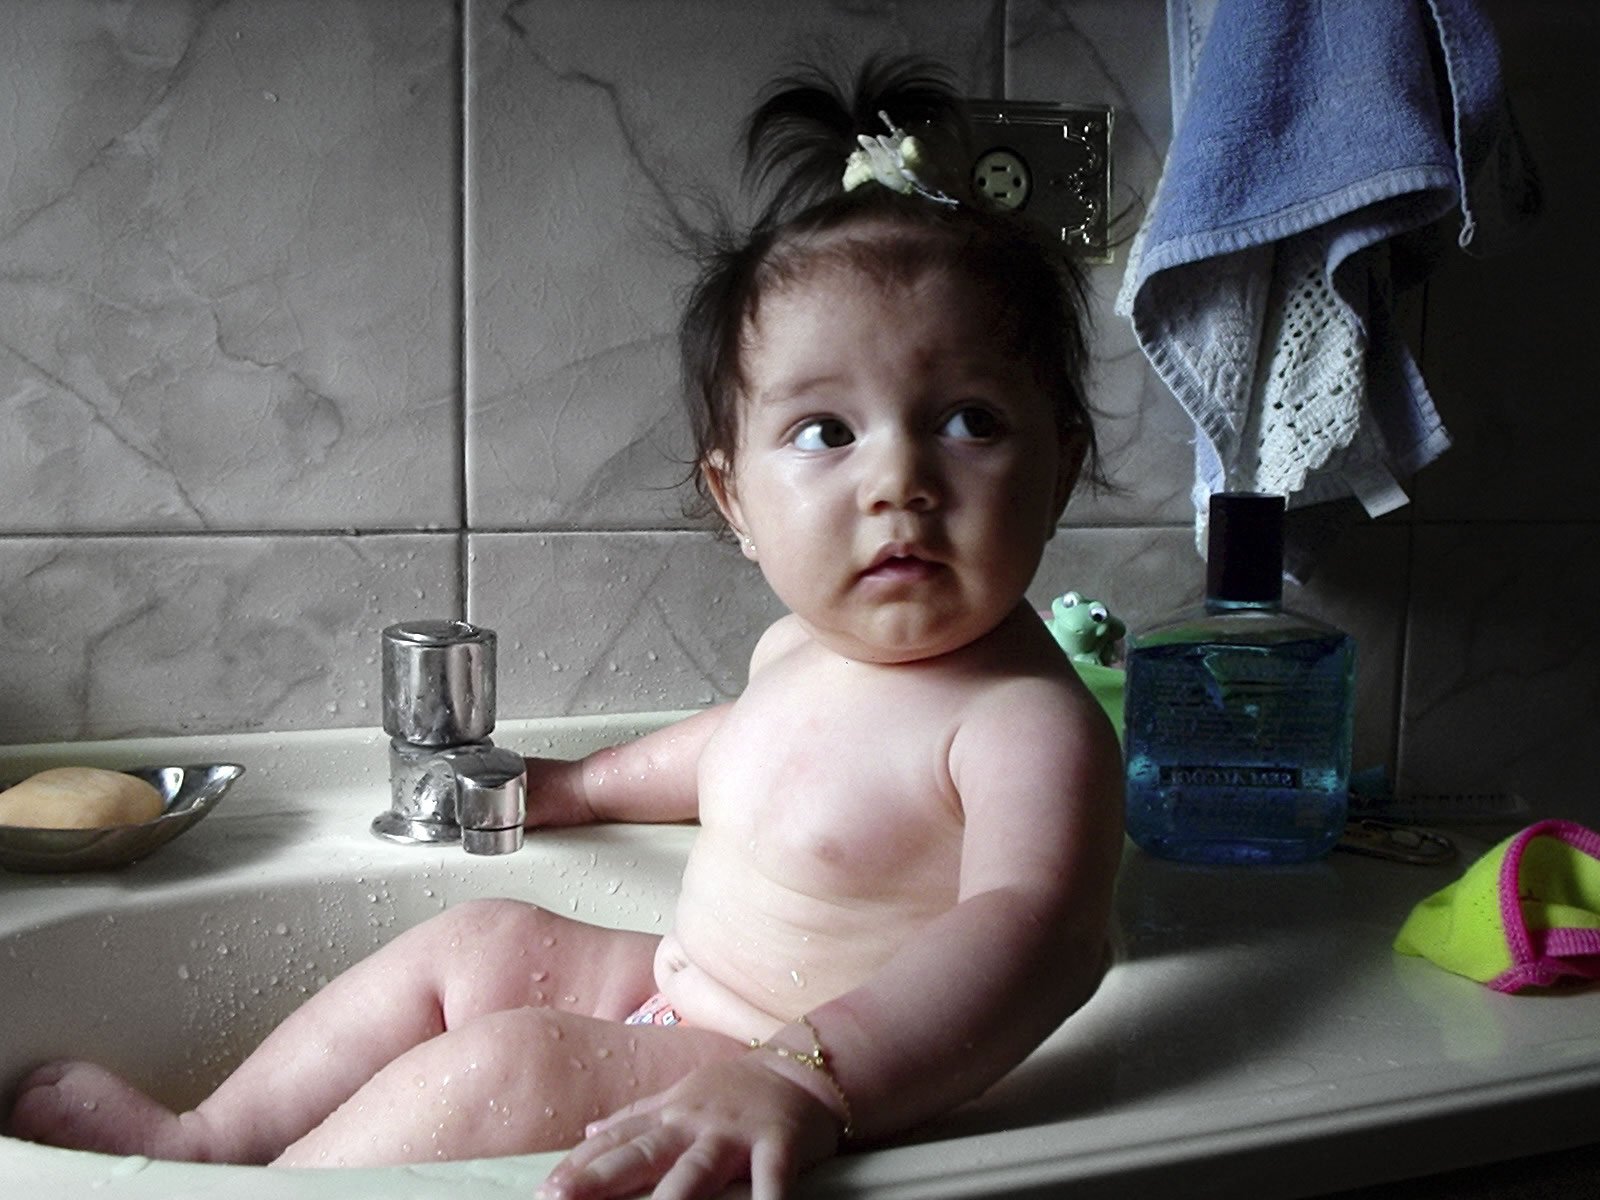 a young baby girl sitting in a white bathroom sink with her hand up